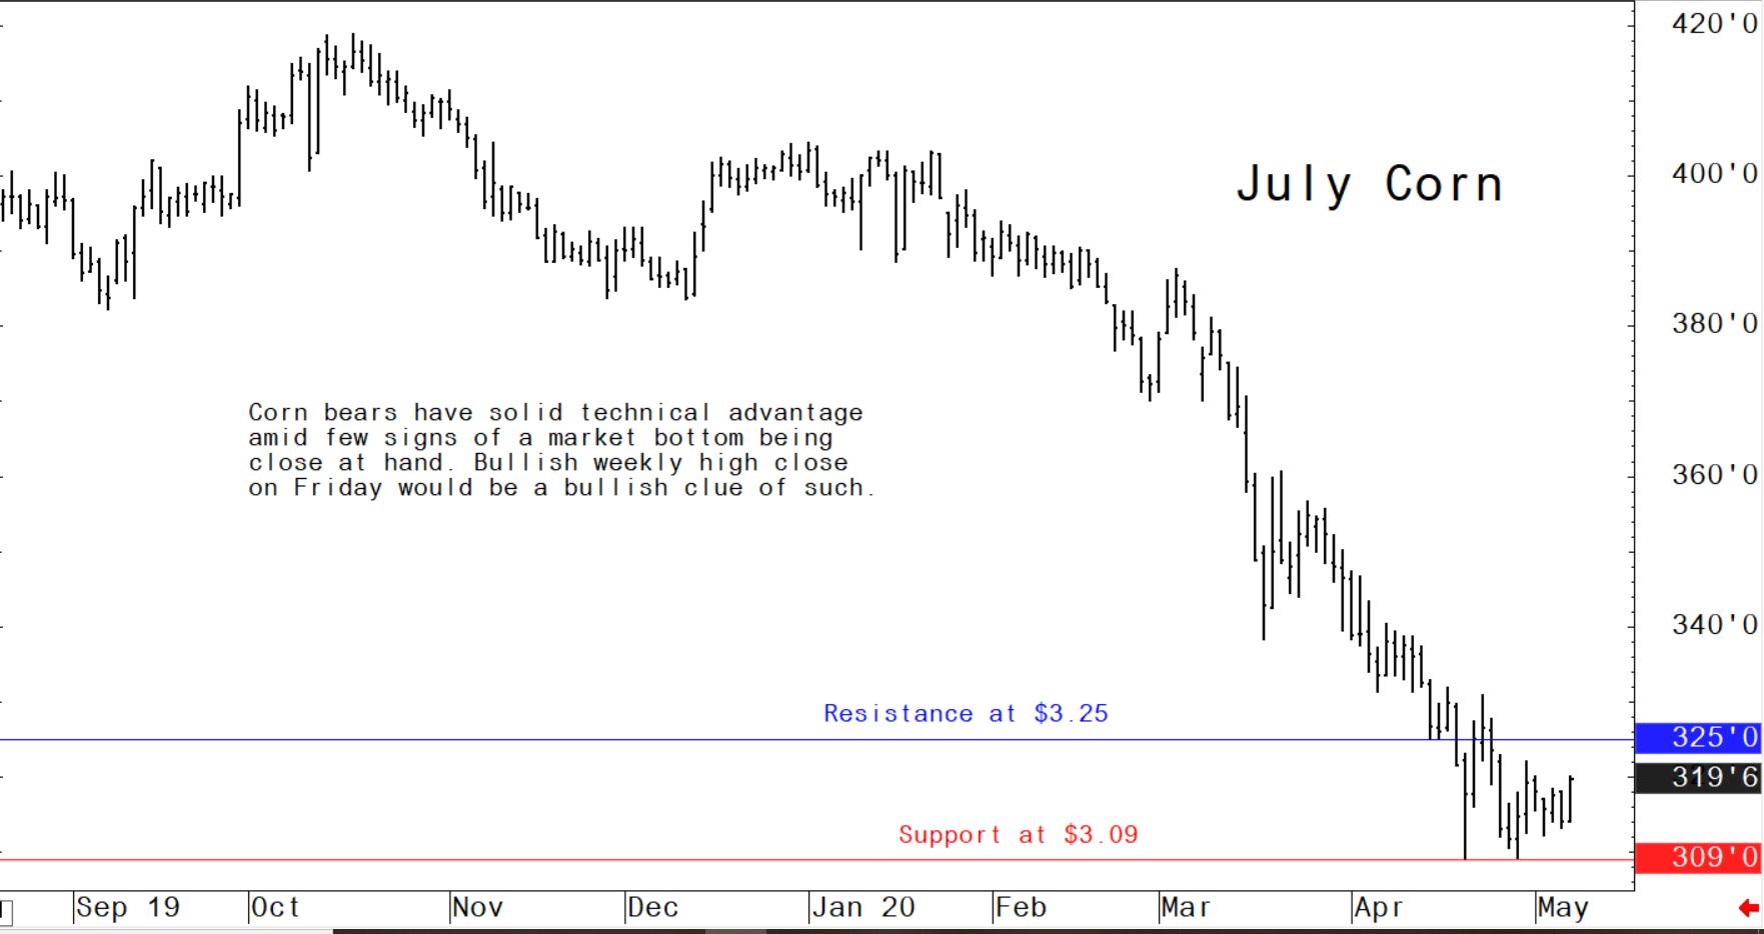 US corn futures graph showing a positive uptrend in prices